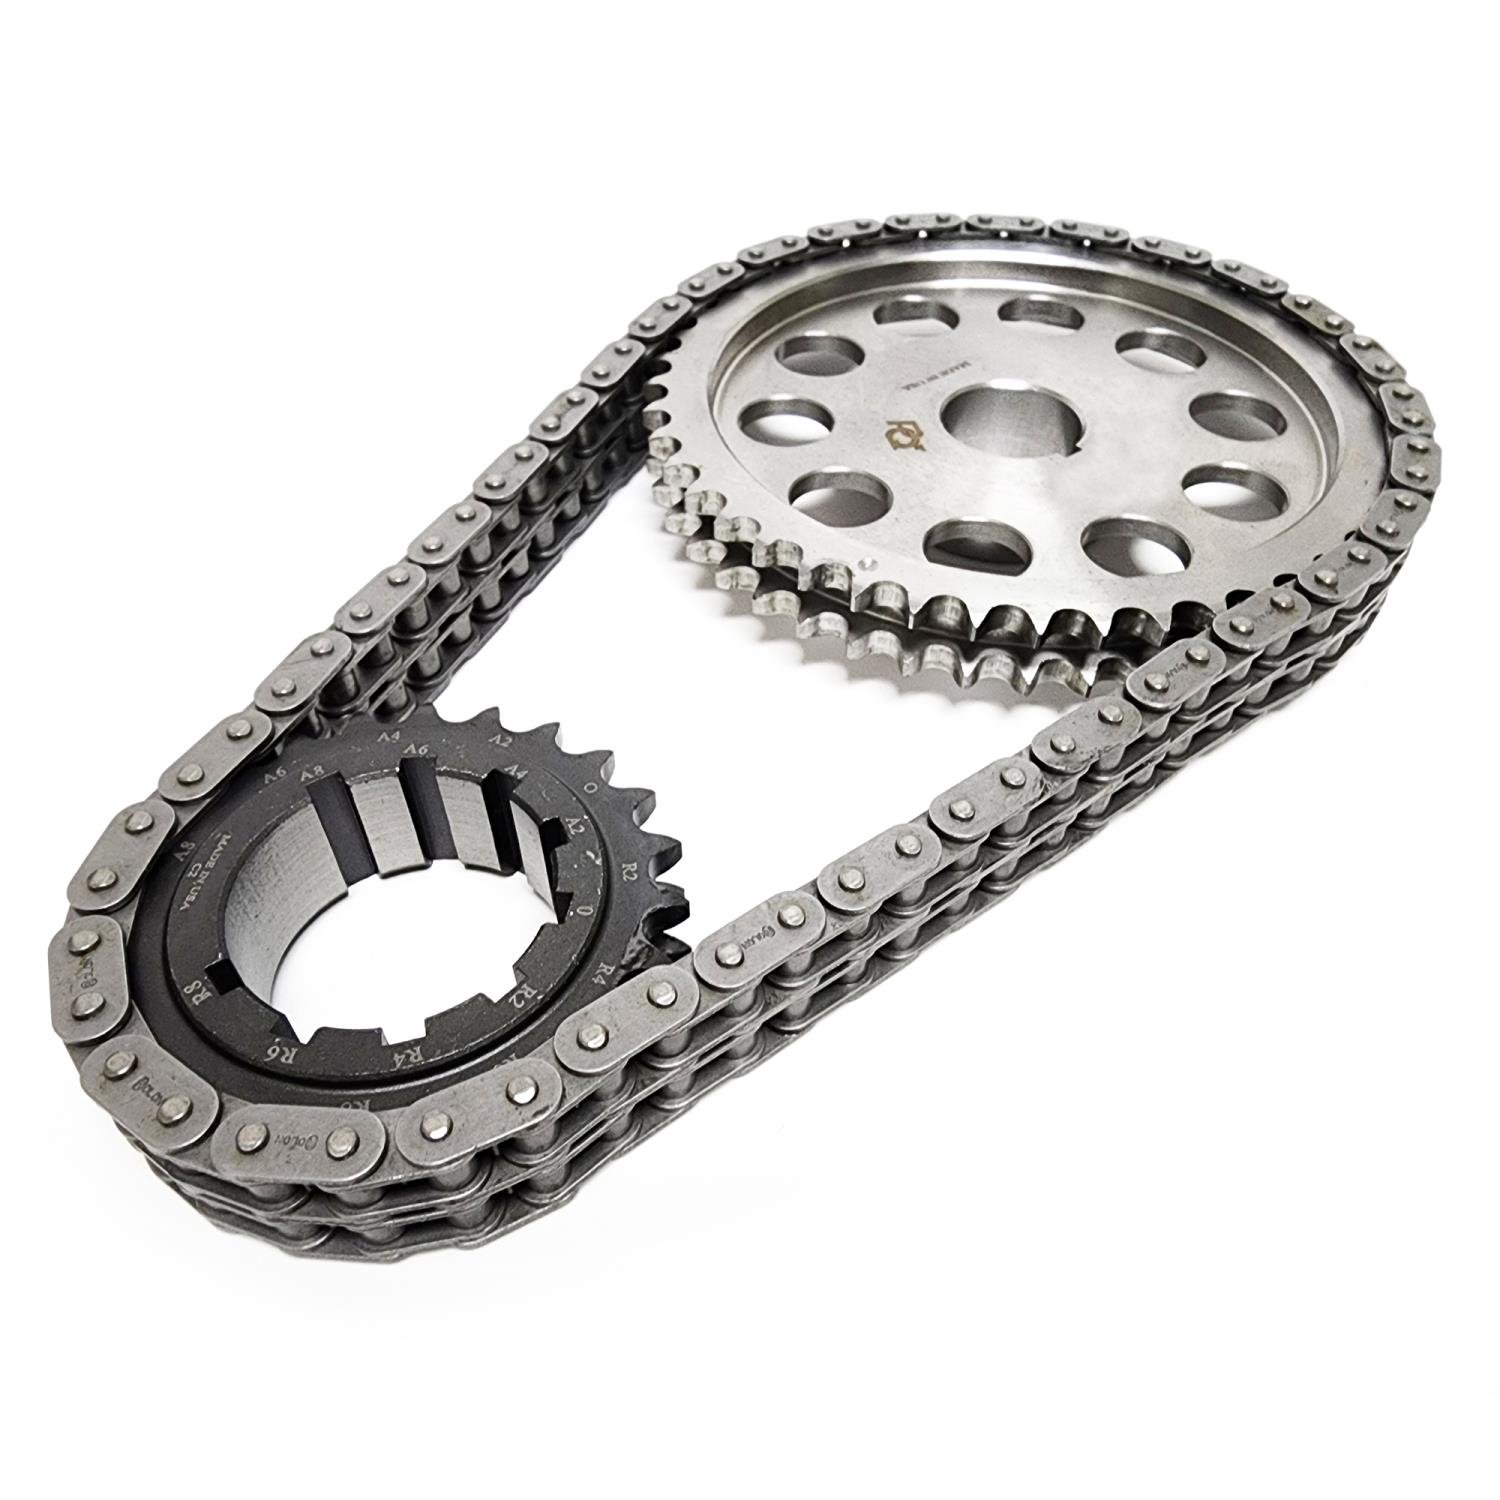 Double-Roller Timing Chain and Gear Set for Mopar 273/318/340/360 V8